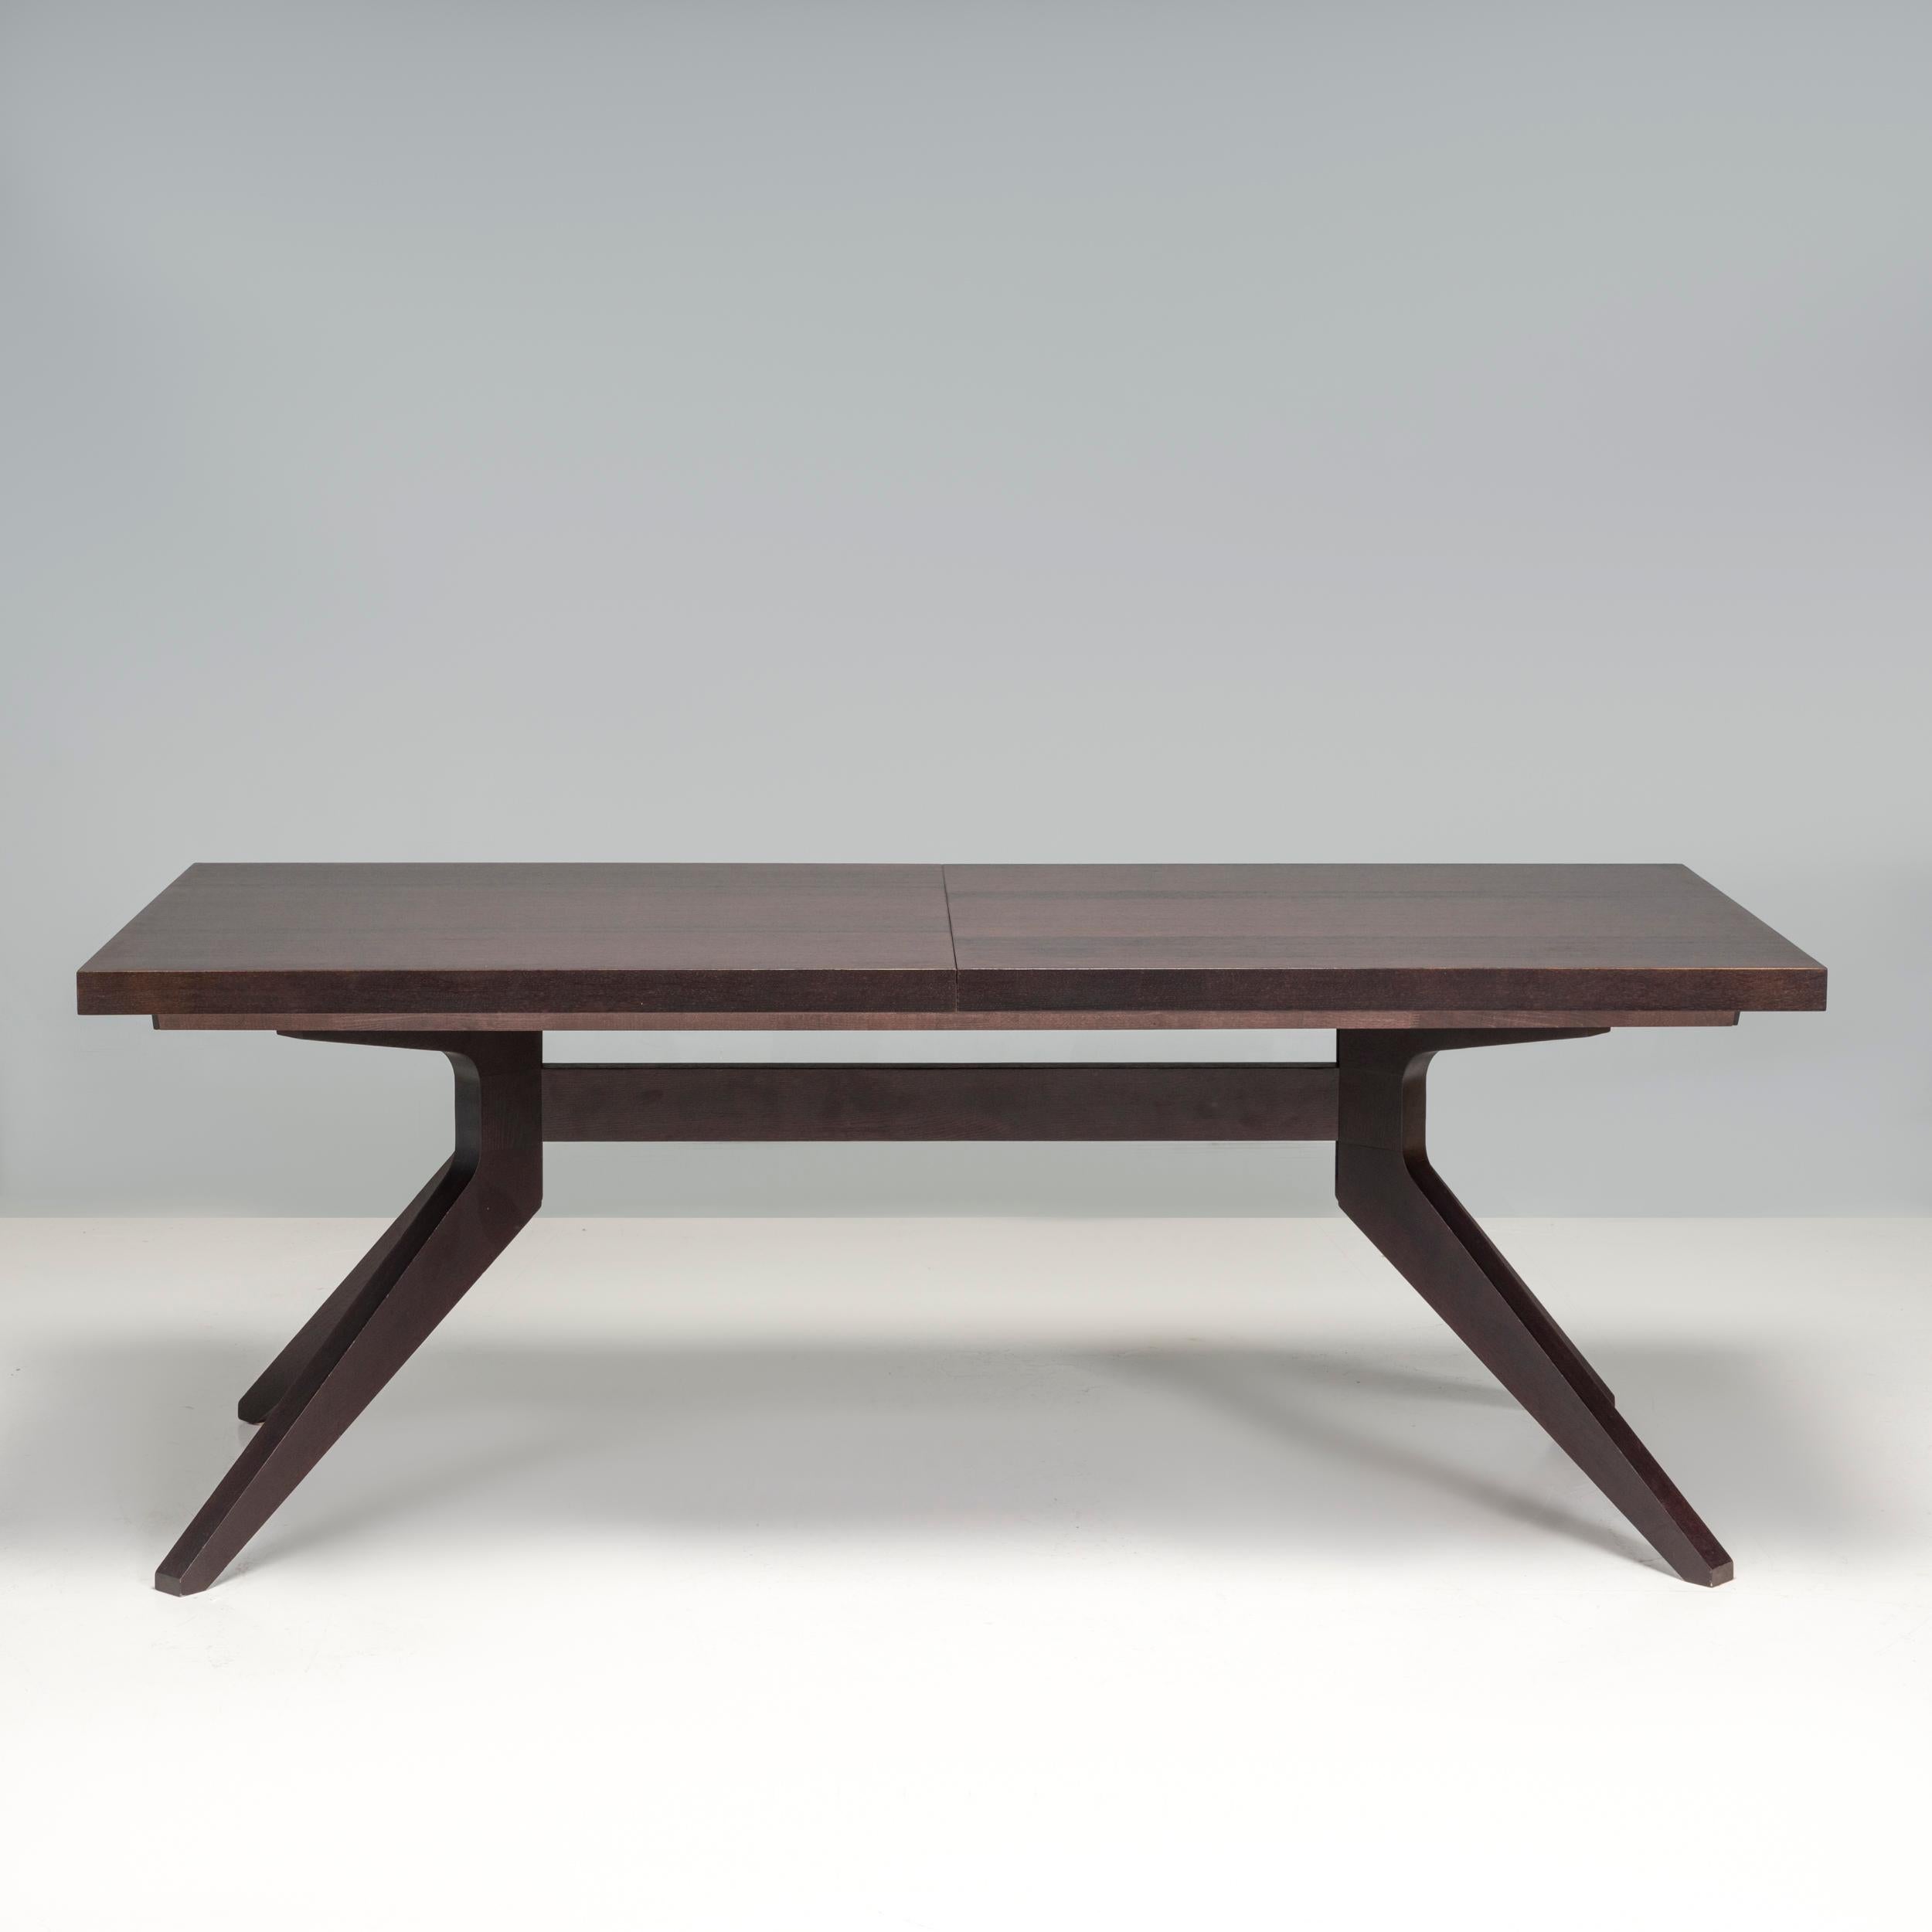 Originally designed by Matthew Hilton in 2014 and manufactured by Case furniture ever since, the Cross dining table is a fantastic example of contemporary British design, winner of the Designer's Guild award.

Manufactured in Lithuania from solid